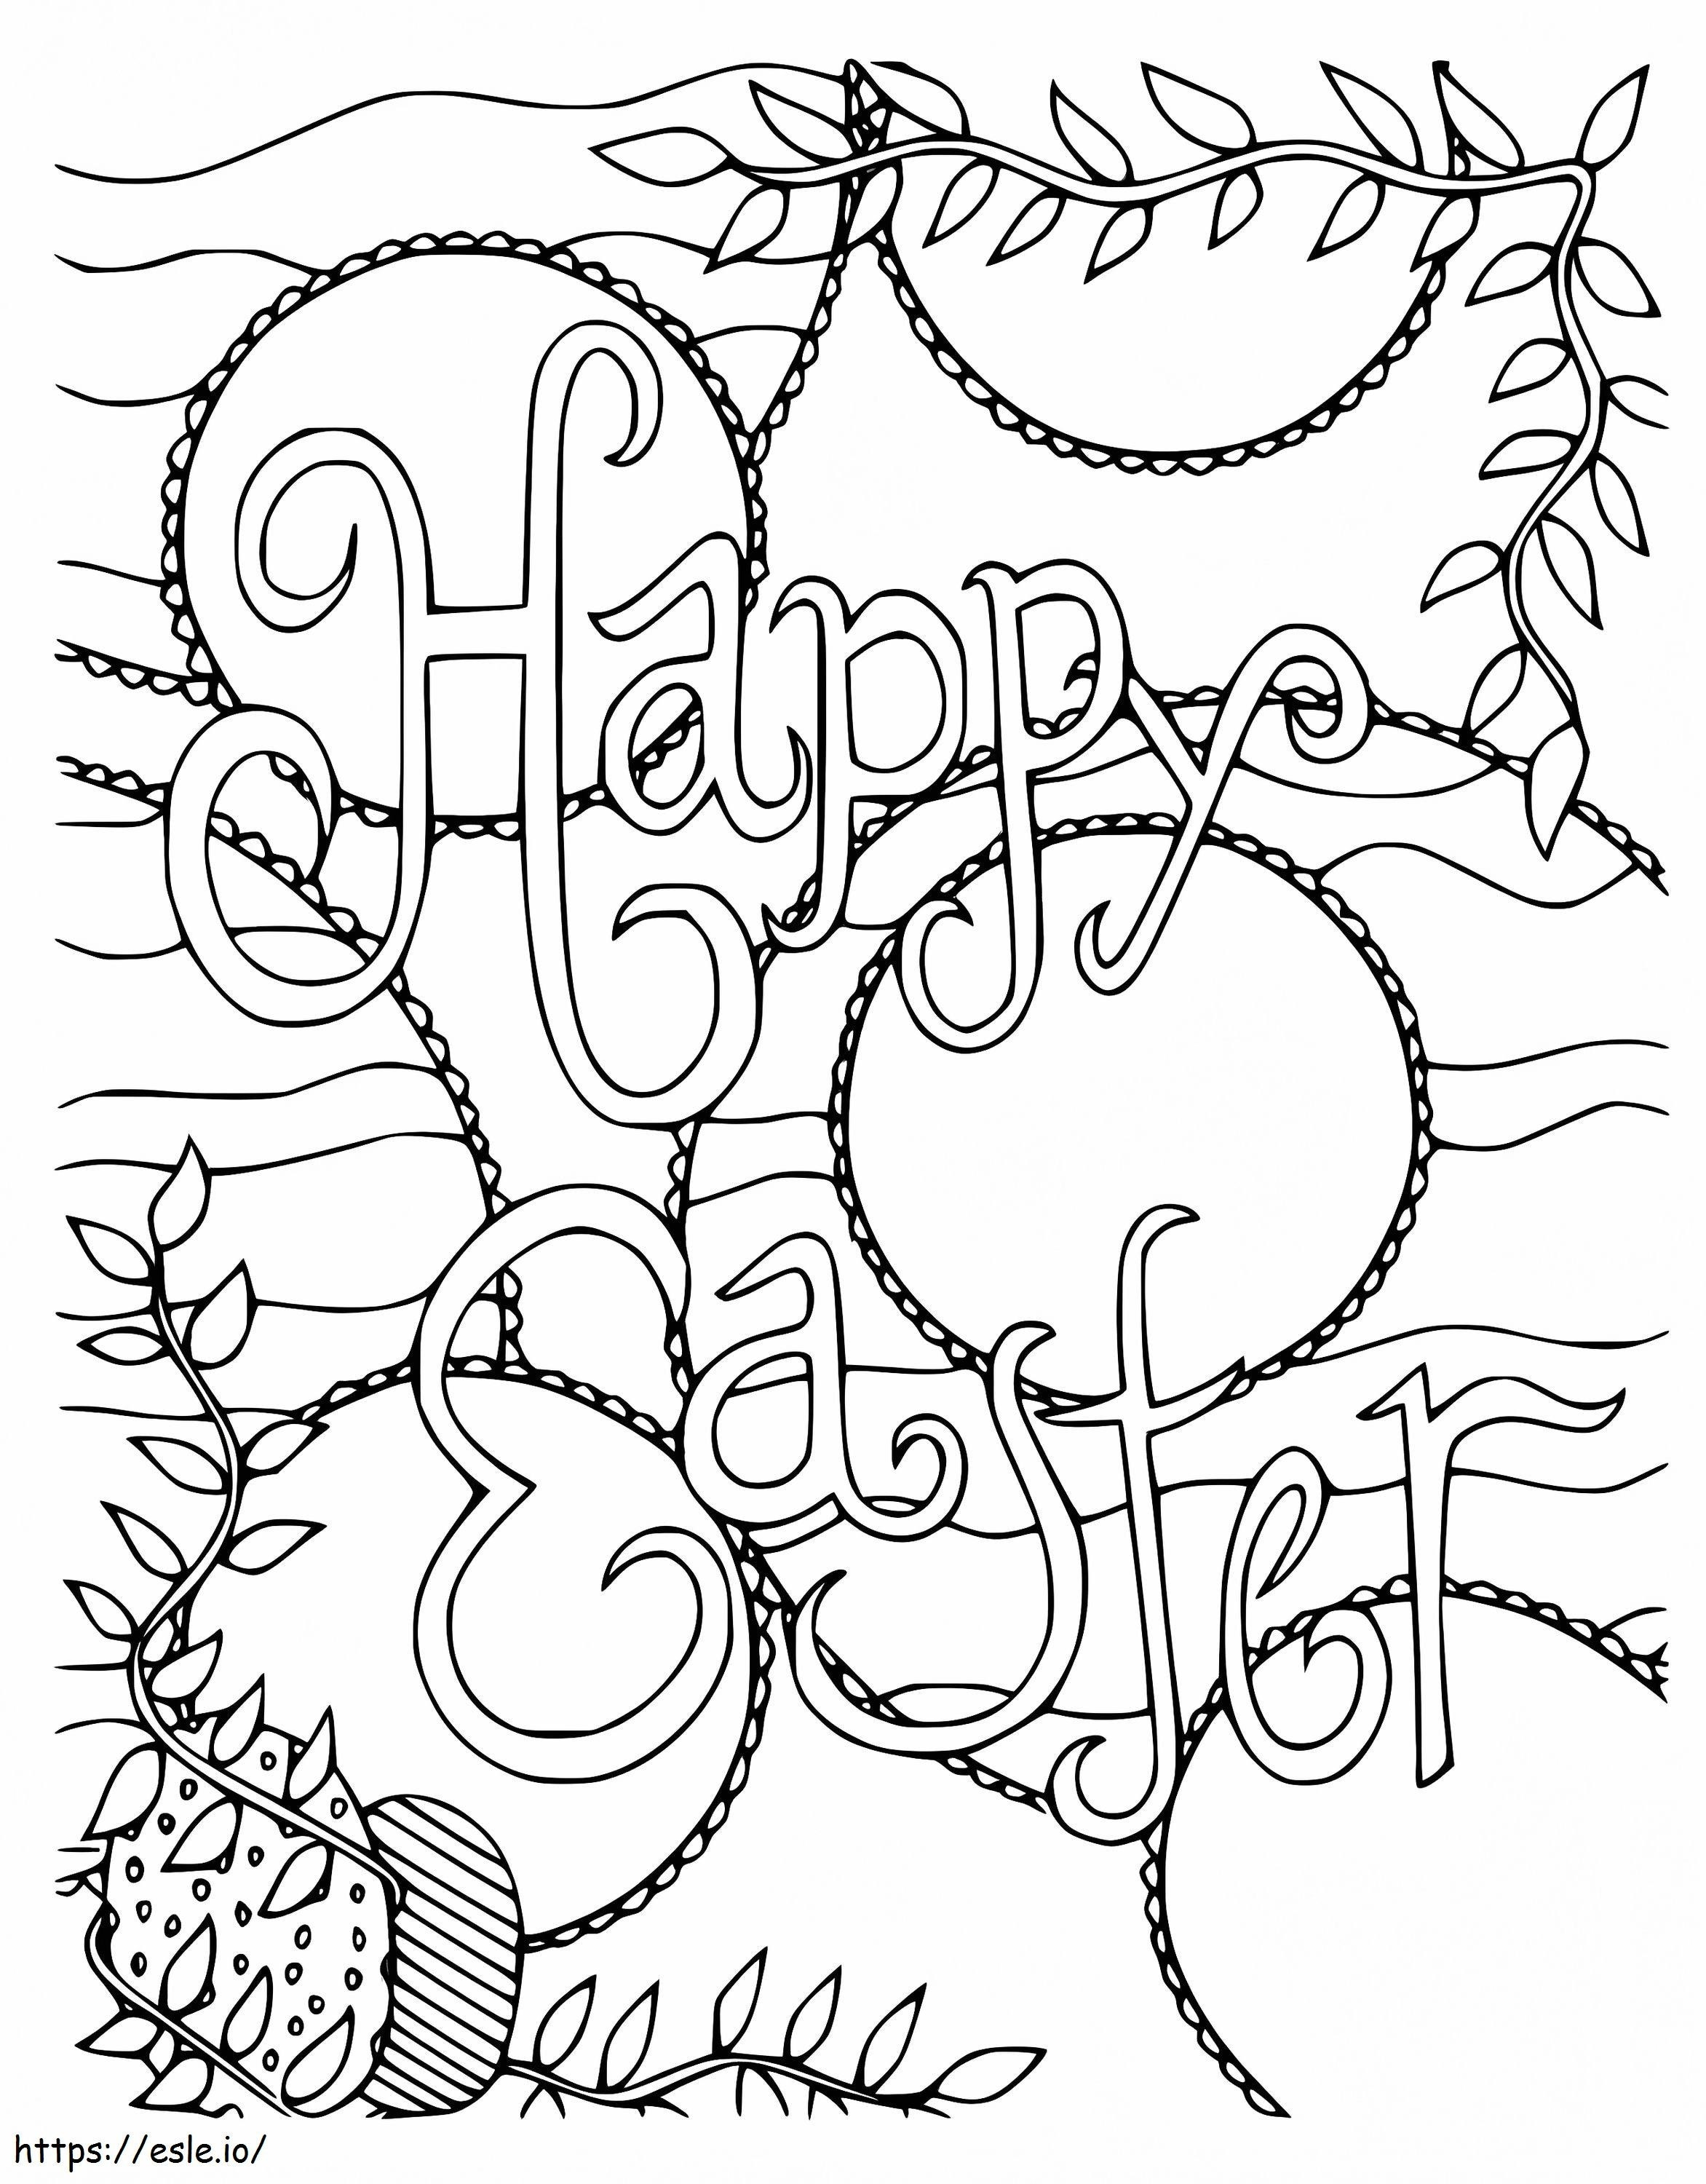 Wonderful Easter Card coloring page